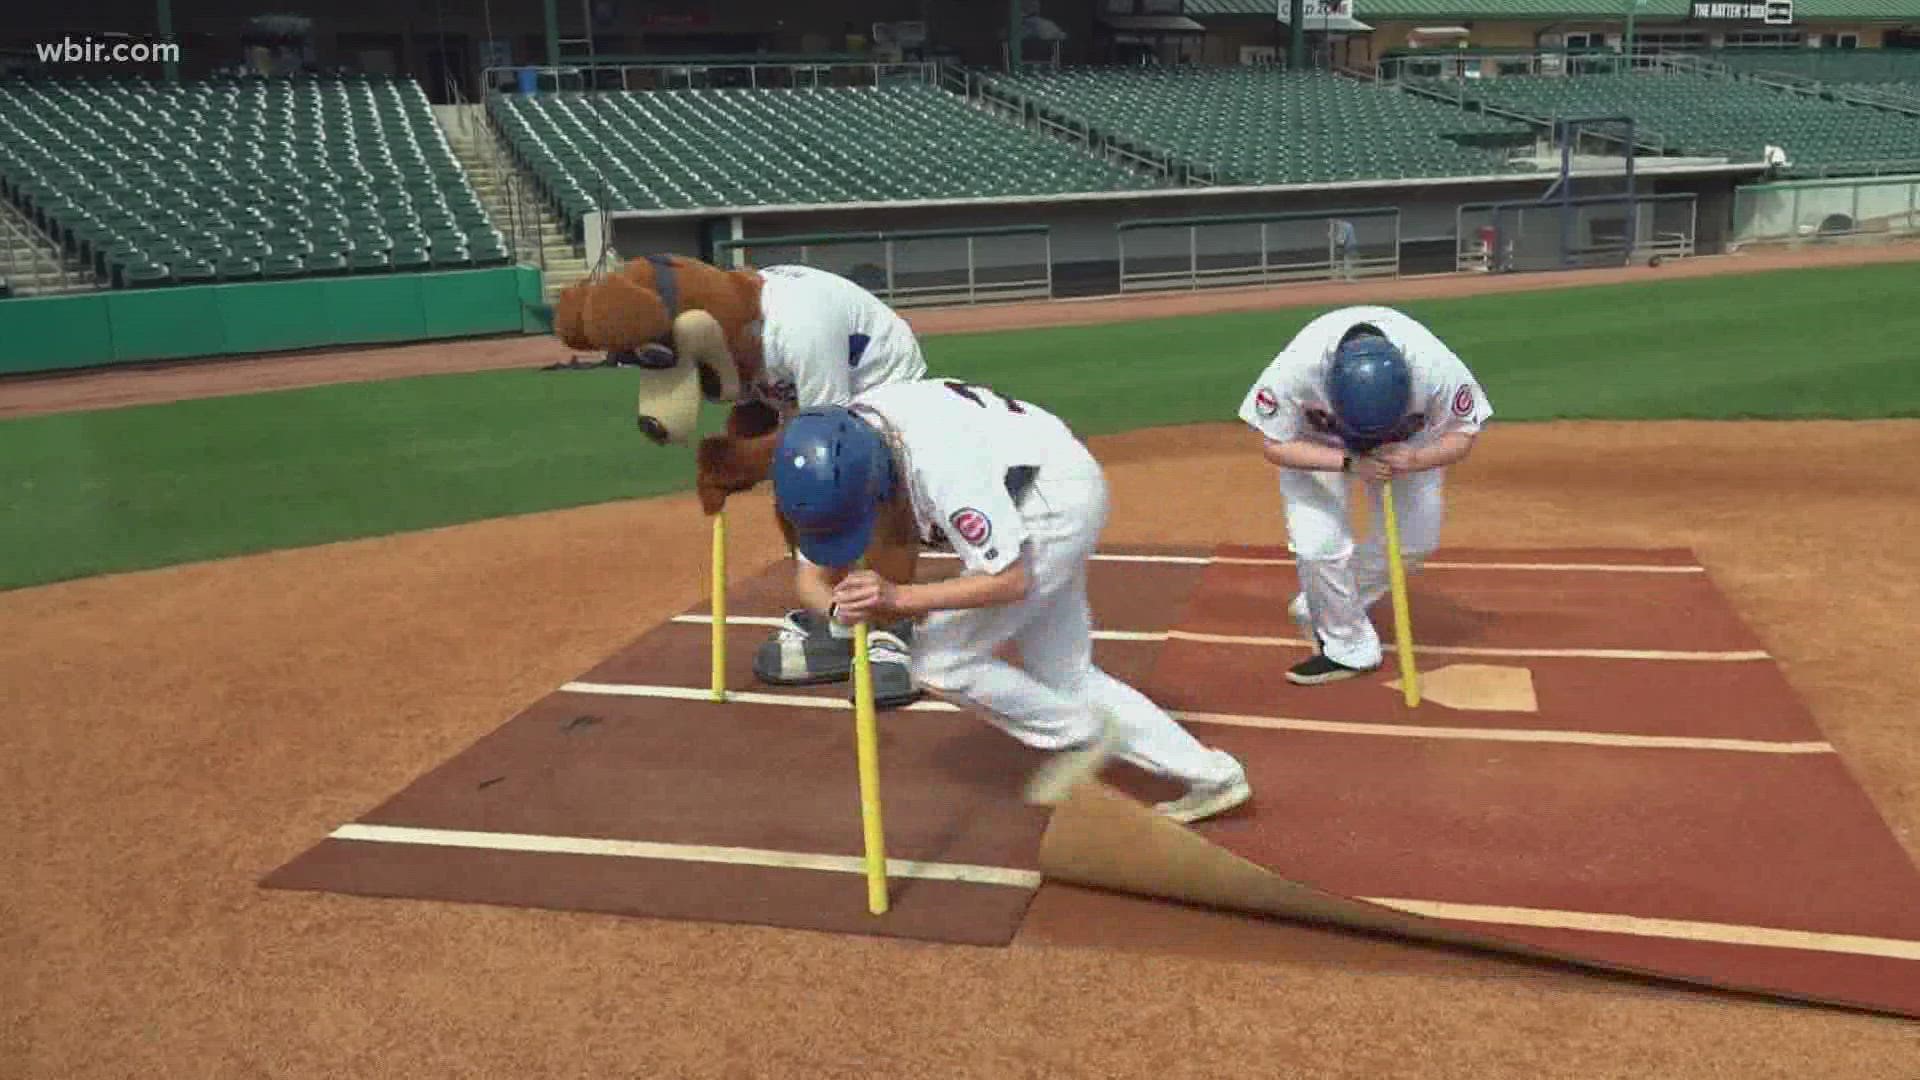 Put your forehead on a bat, spin around 10 times, and run. Those are the rules of dizzy bat, one of the games fans can play for prizes at Smokies' baseball games.